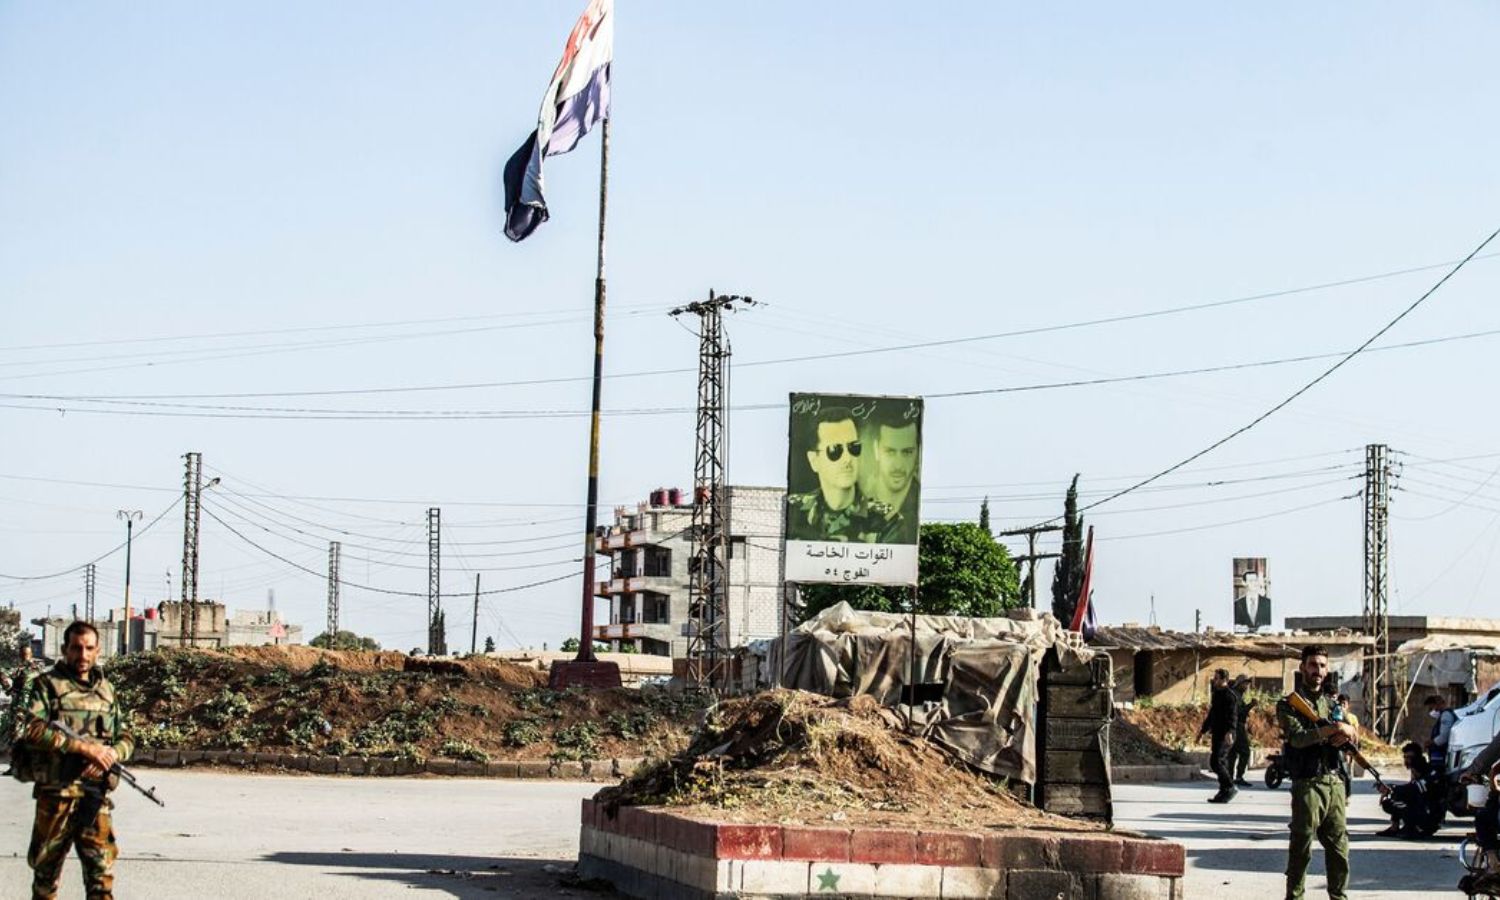 Members of the Kurdish internal security forces “Asayish” and Syrian regime forces guard a checkpoint at the northern entrance to the Znoud neighborhood in the northeastern city of Qamishli - April 27, 2021 (AFP)